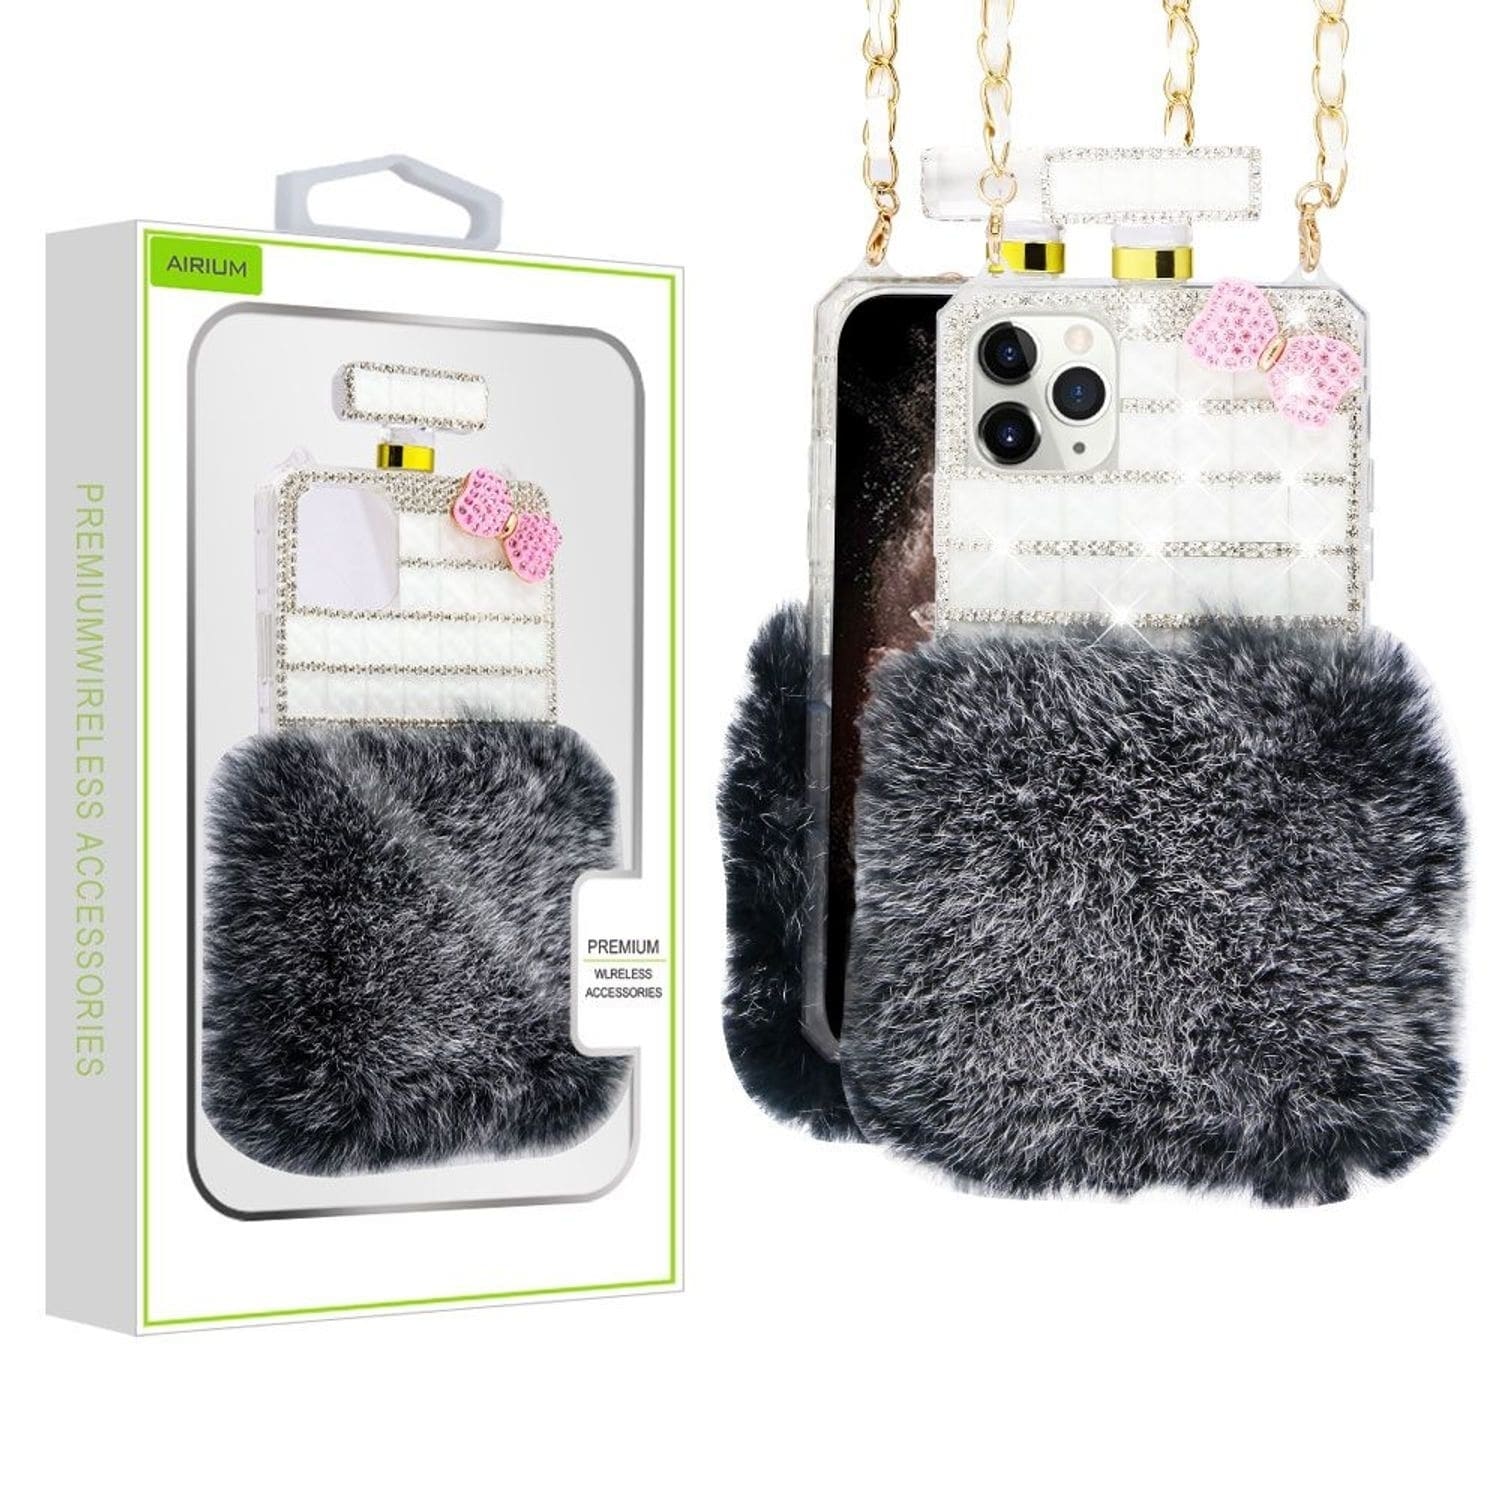 Shop Insten Cute Plush With Chain Perfume Bottle Hard Plastic W Diamond For Apple Iphone 11 Pro Max Gray White Overstock 30730180